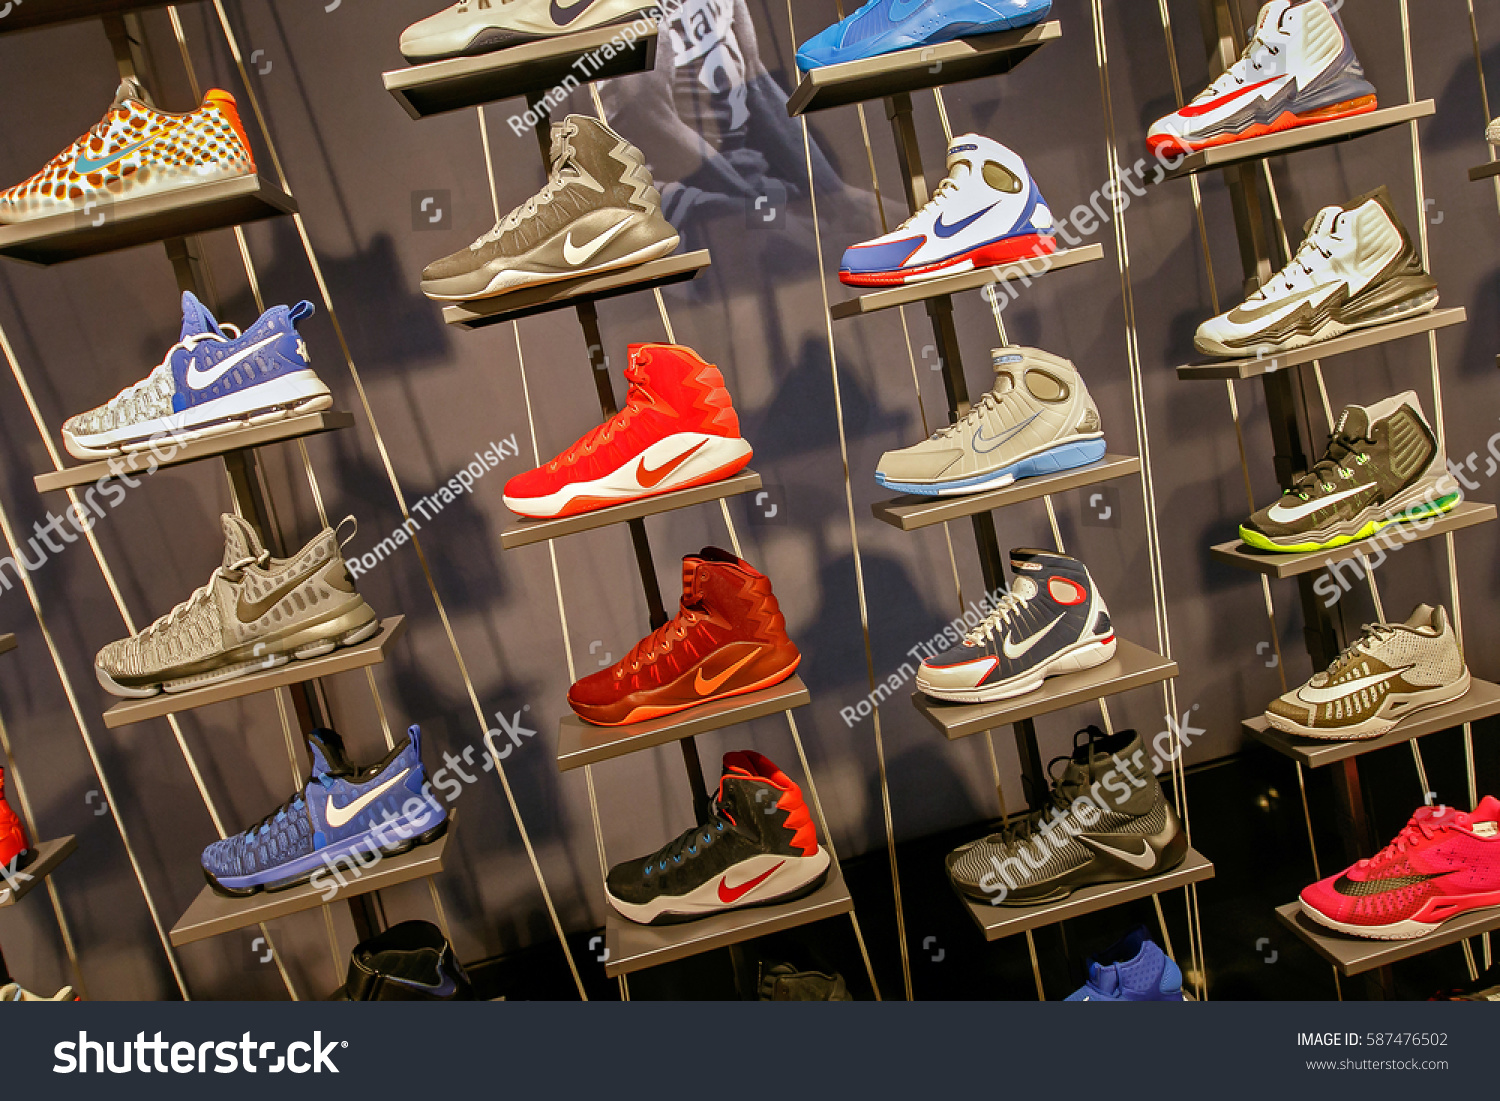 Stock Photo New York February Assorted Nike Basketball Shoes For Sale In The Nba Store In Manhattan 587476502 